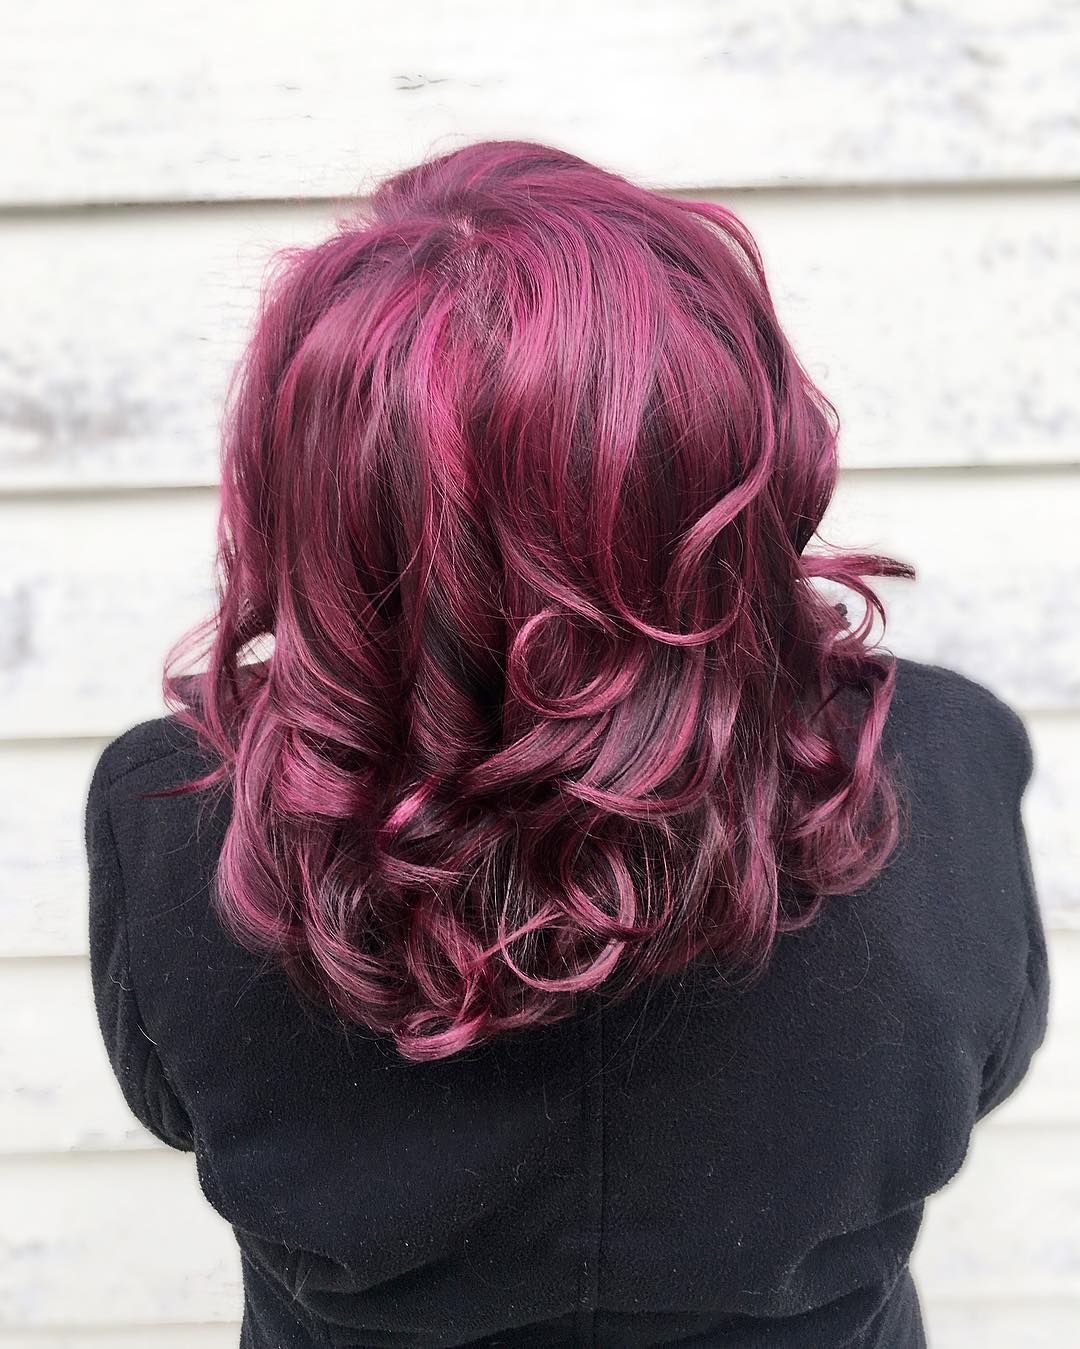 Appealing Burgundy Curls Perfect For Valentine's Day